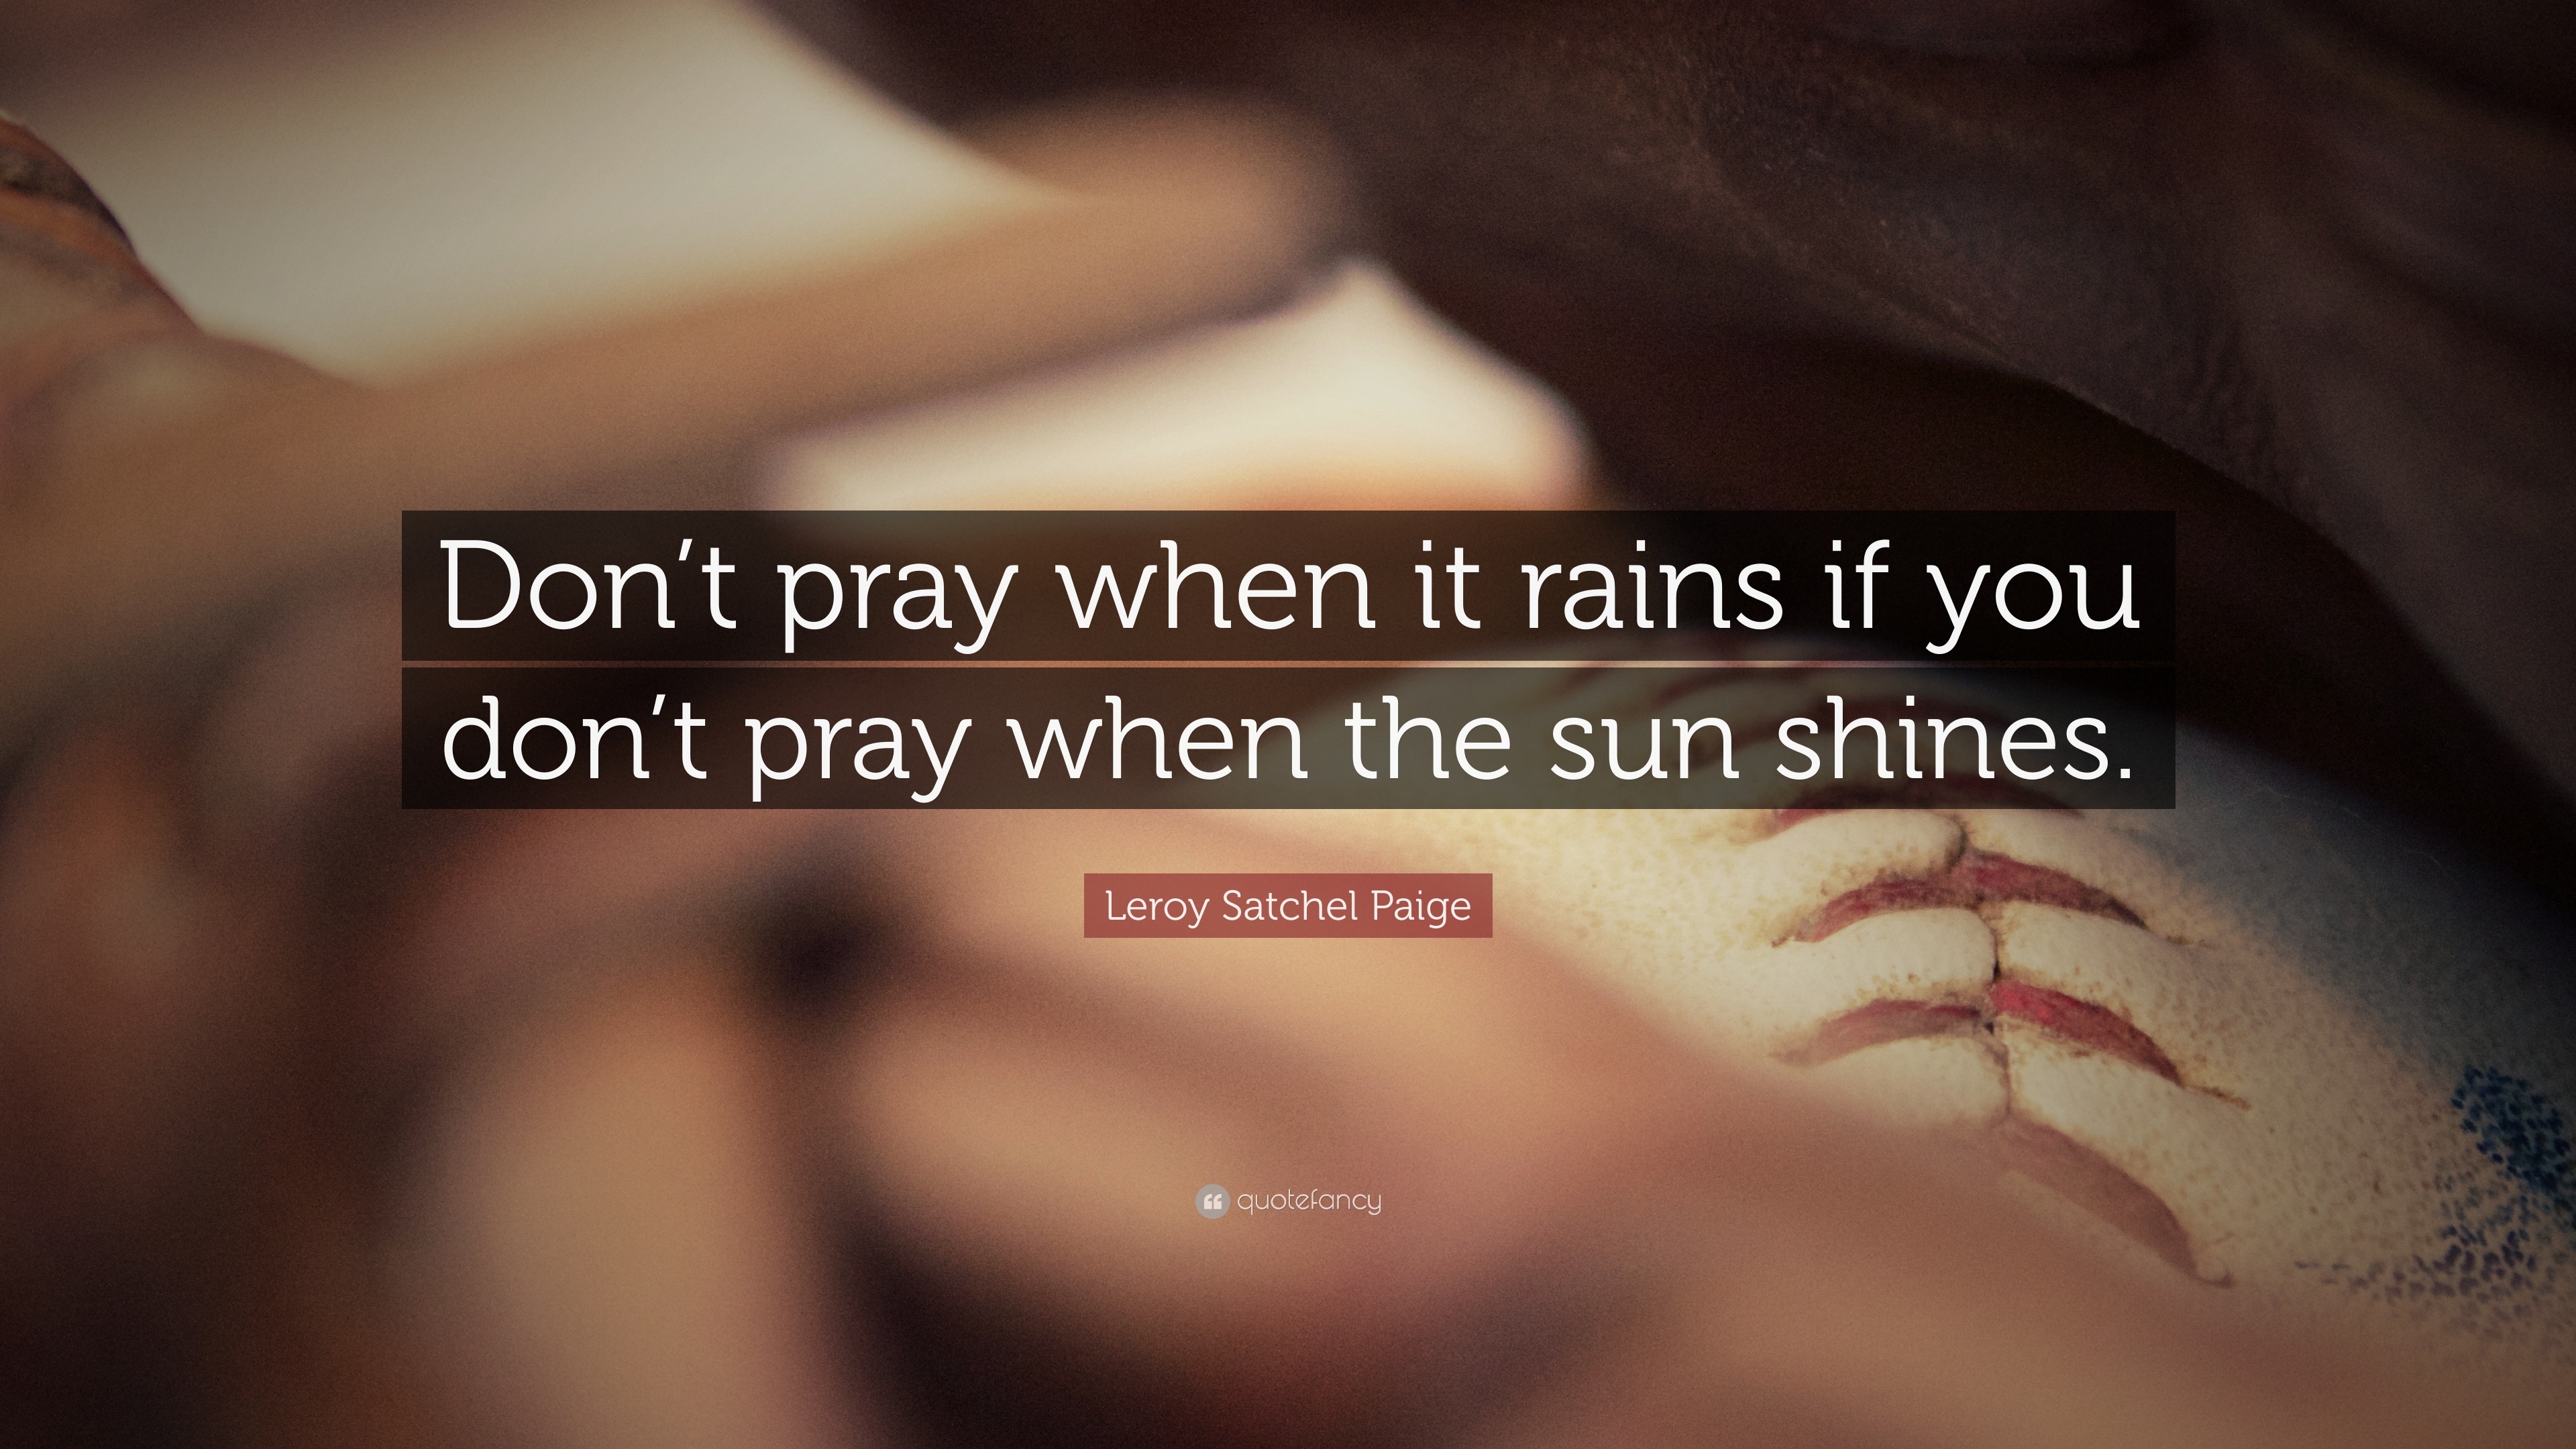 Leroy Satchel Paige Quote: “Don't pray when it rains if you don't